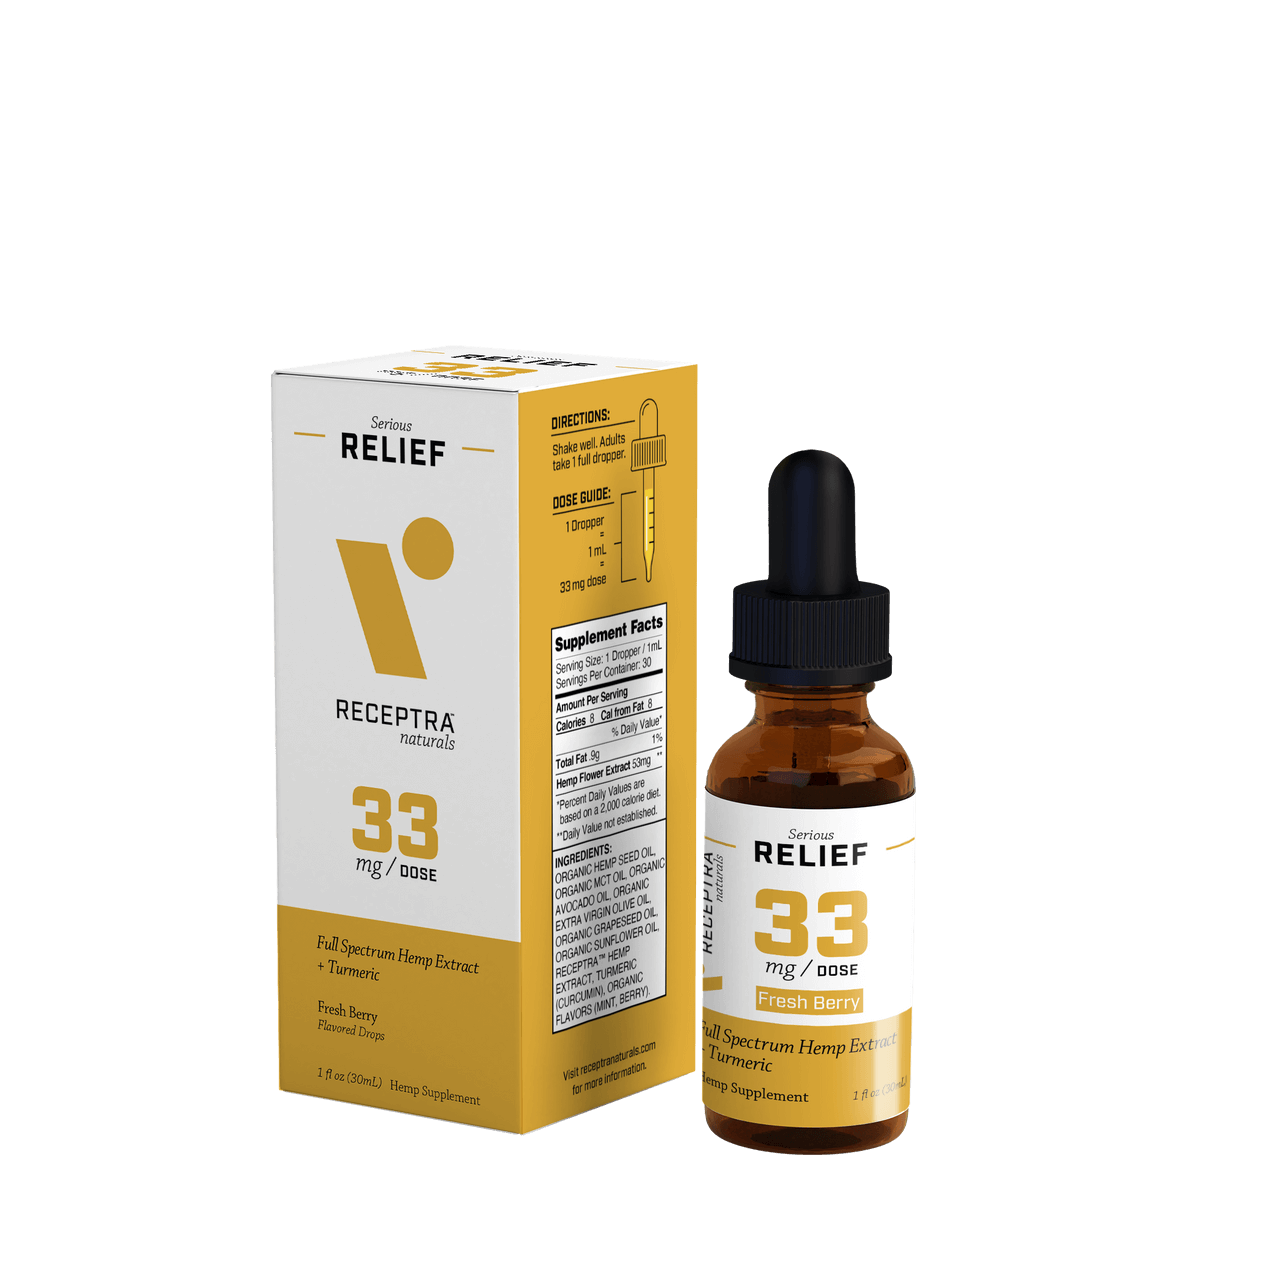 Serious Relief + Turmeric Tincture 33mg/dose logo